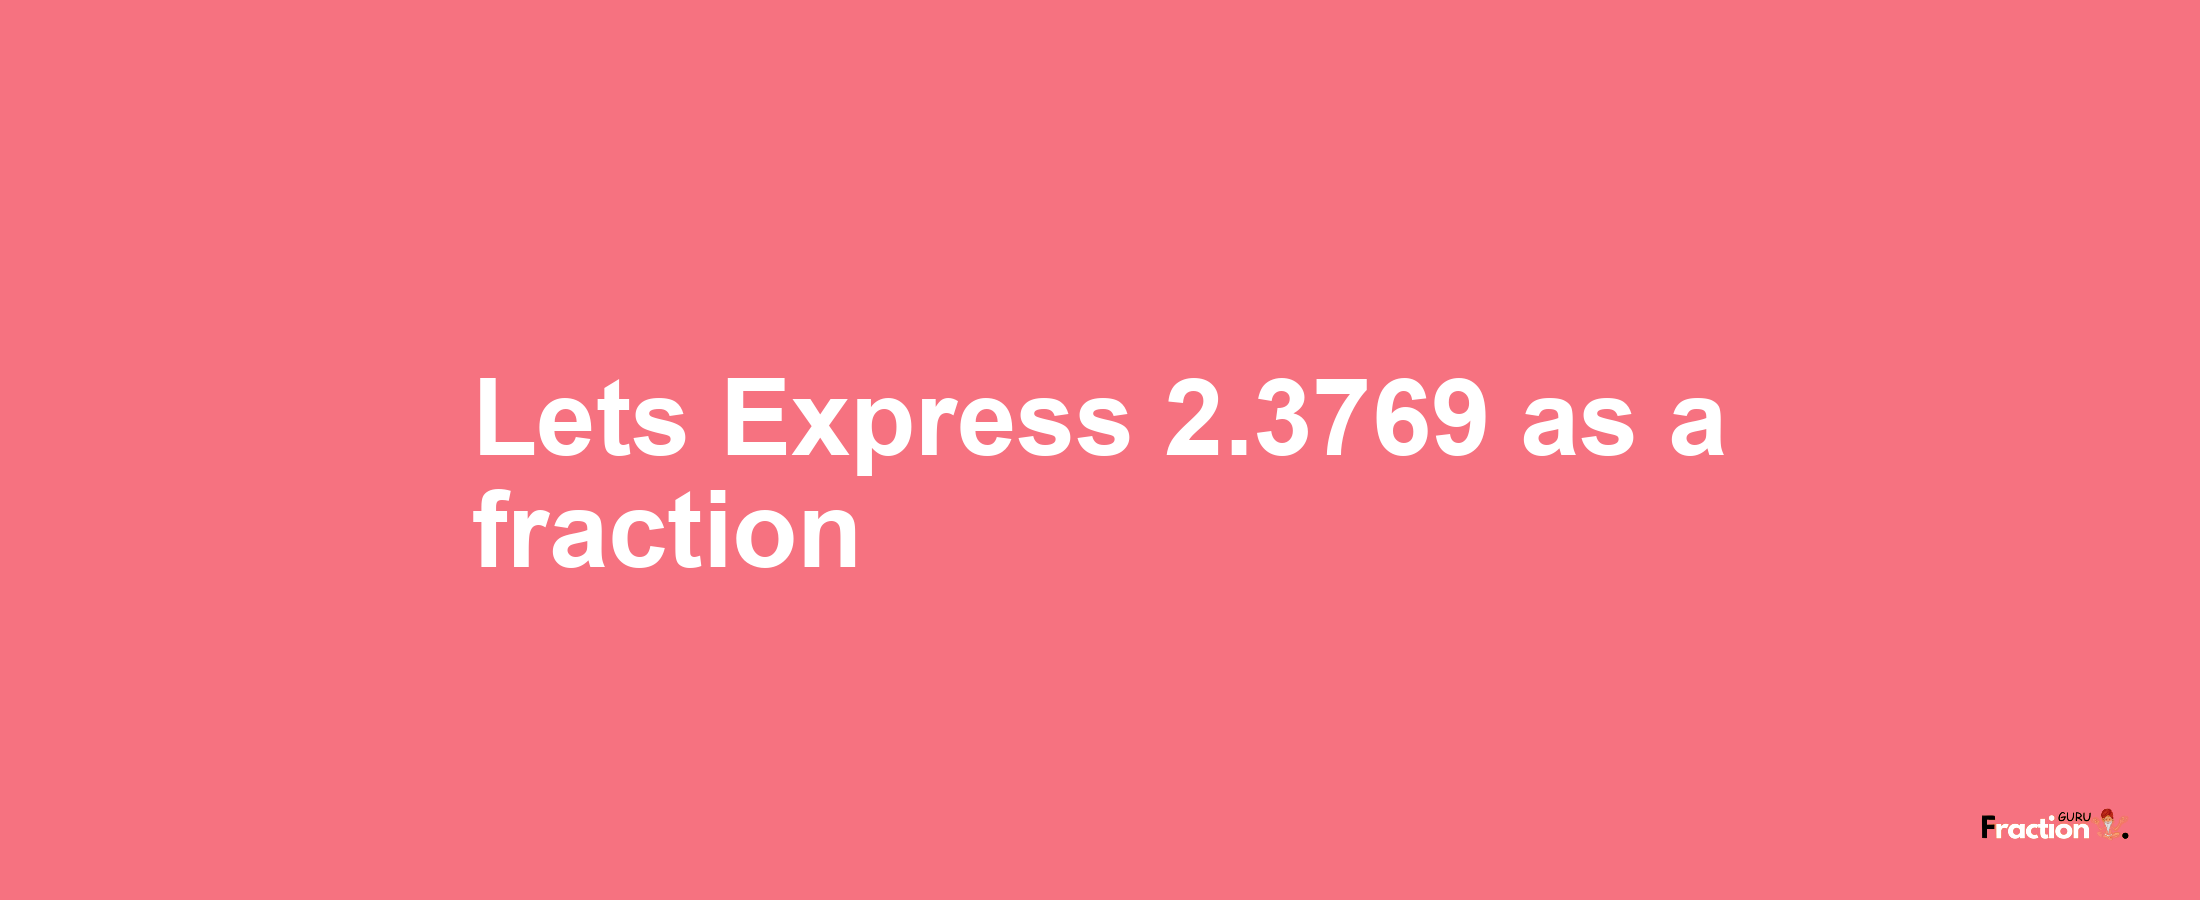 Lets Express 2.3769 as afraction